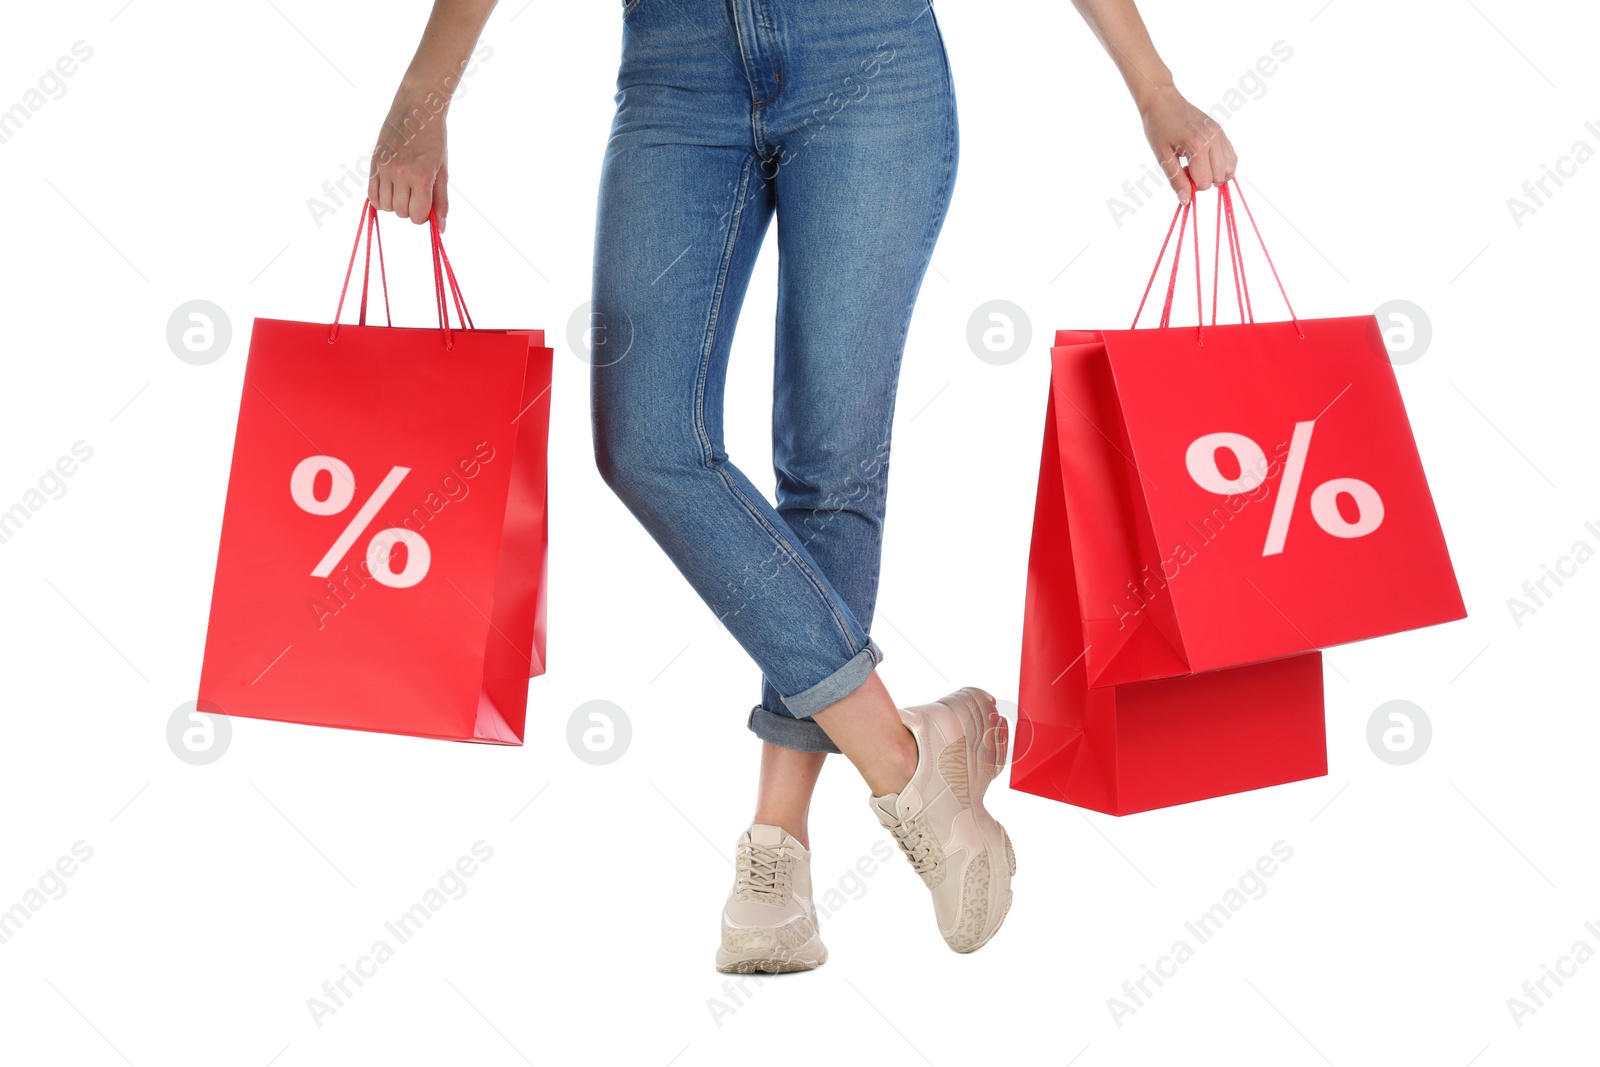 Image of Discount, sale, offer. Woman holding paper bags with percent signs against white background, closeup